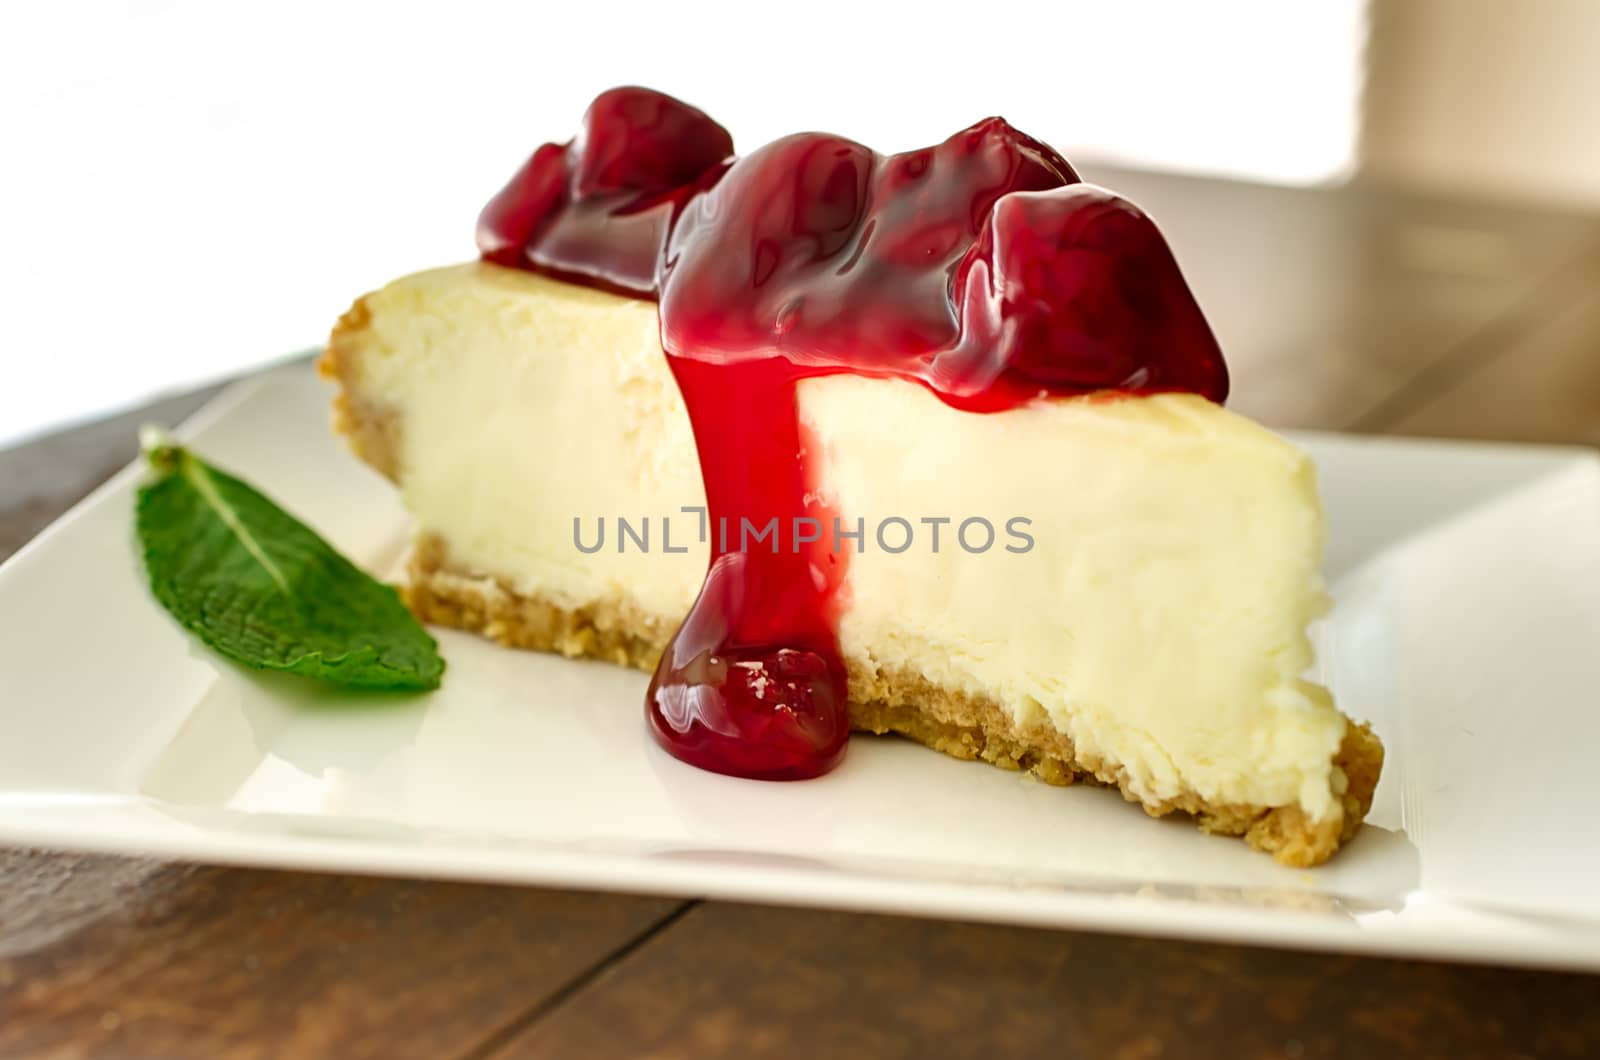 Slice of cherry cheesecake in the afternoon with mint garnish.   Shallow depth of field.  